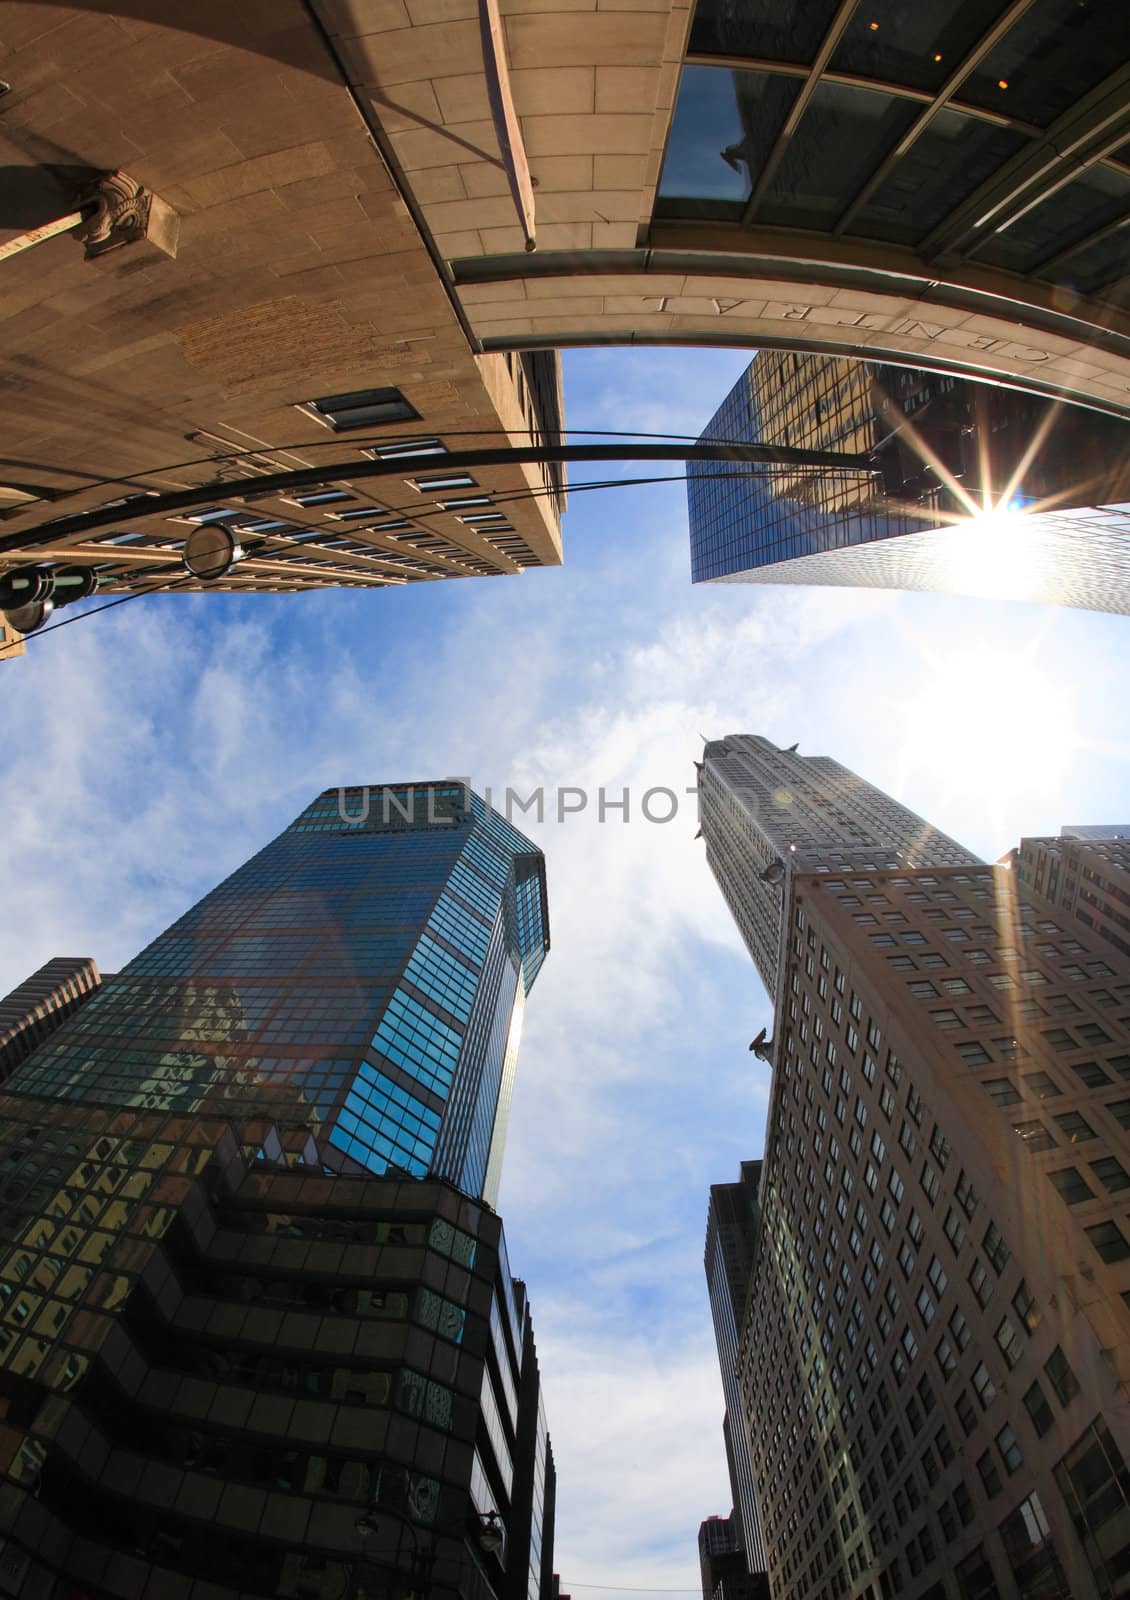 The Chrysler building and other skyscrapers near grand central station in NYC (a fisheye view)